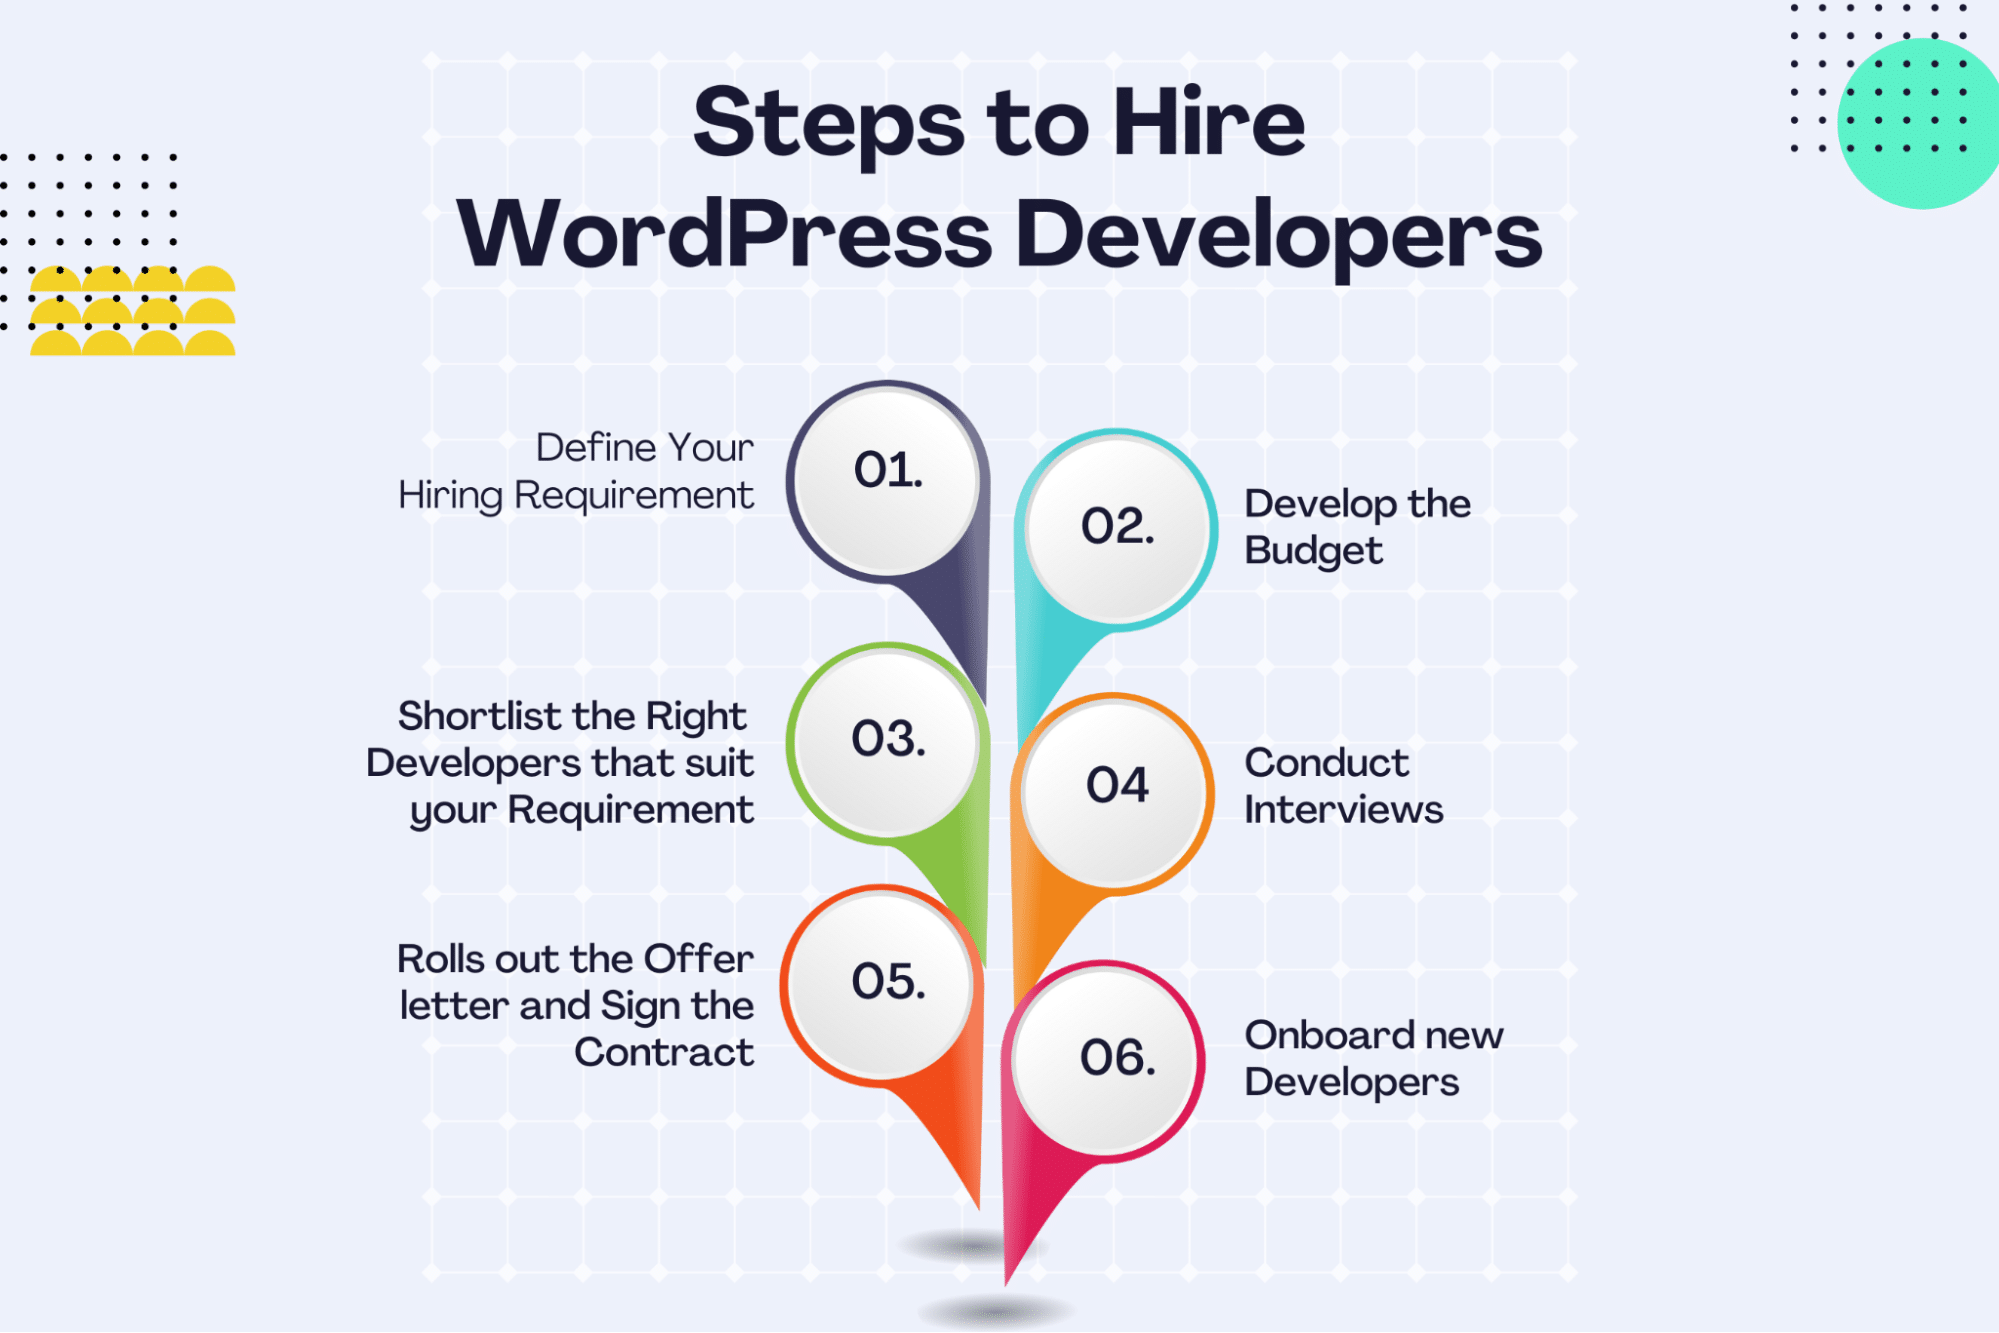 Steps to Hire WordPress Developers